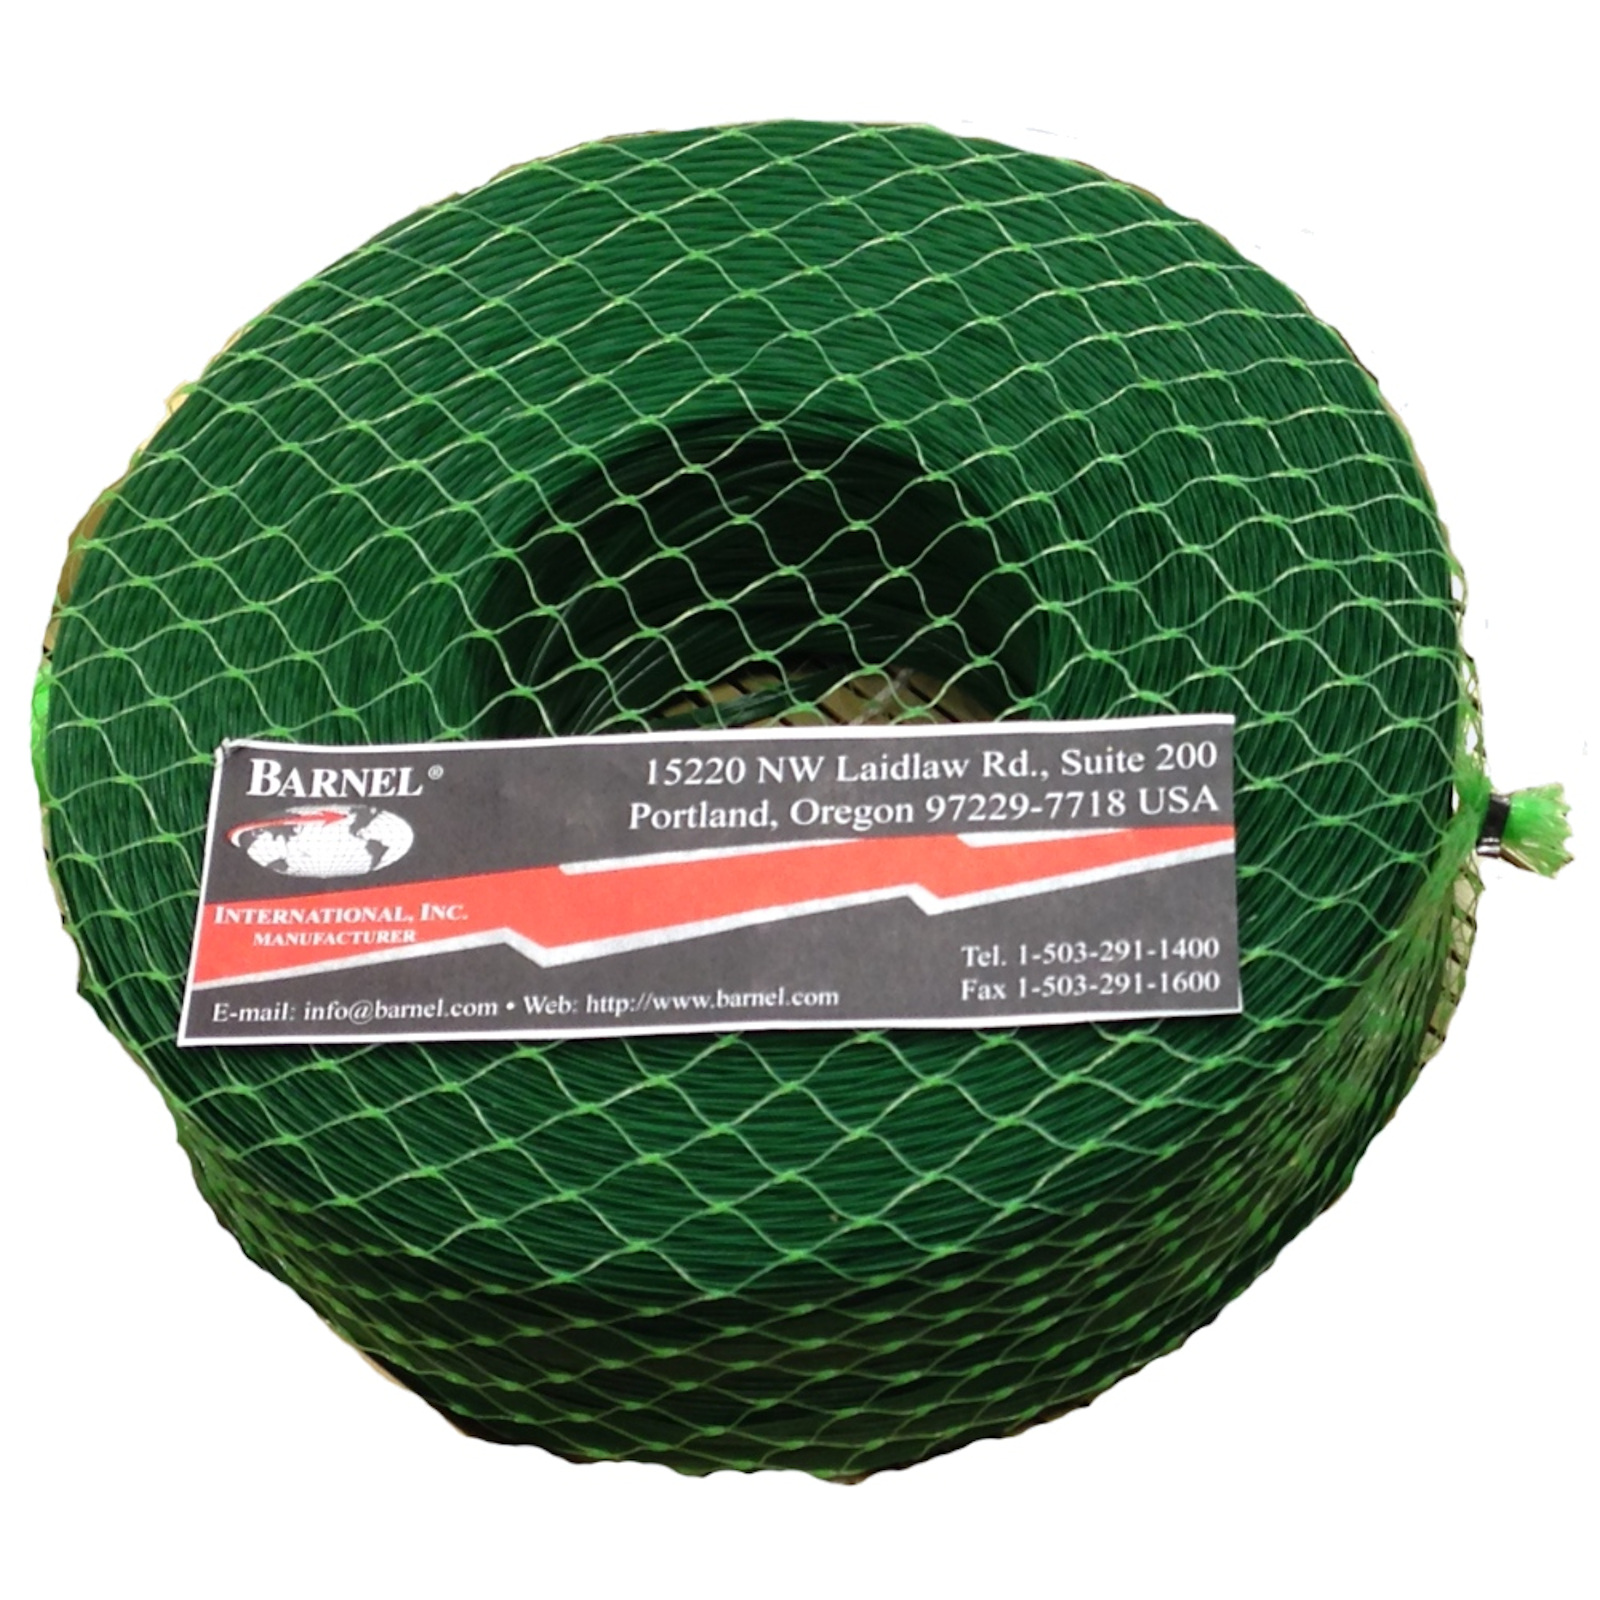 Barnel USA BT-TW 1,320ft Roll Plastic-coated Floral and Viticulture Tie Wire